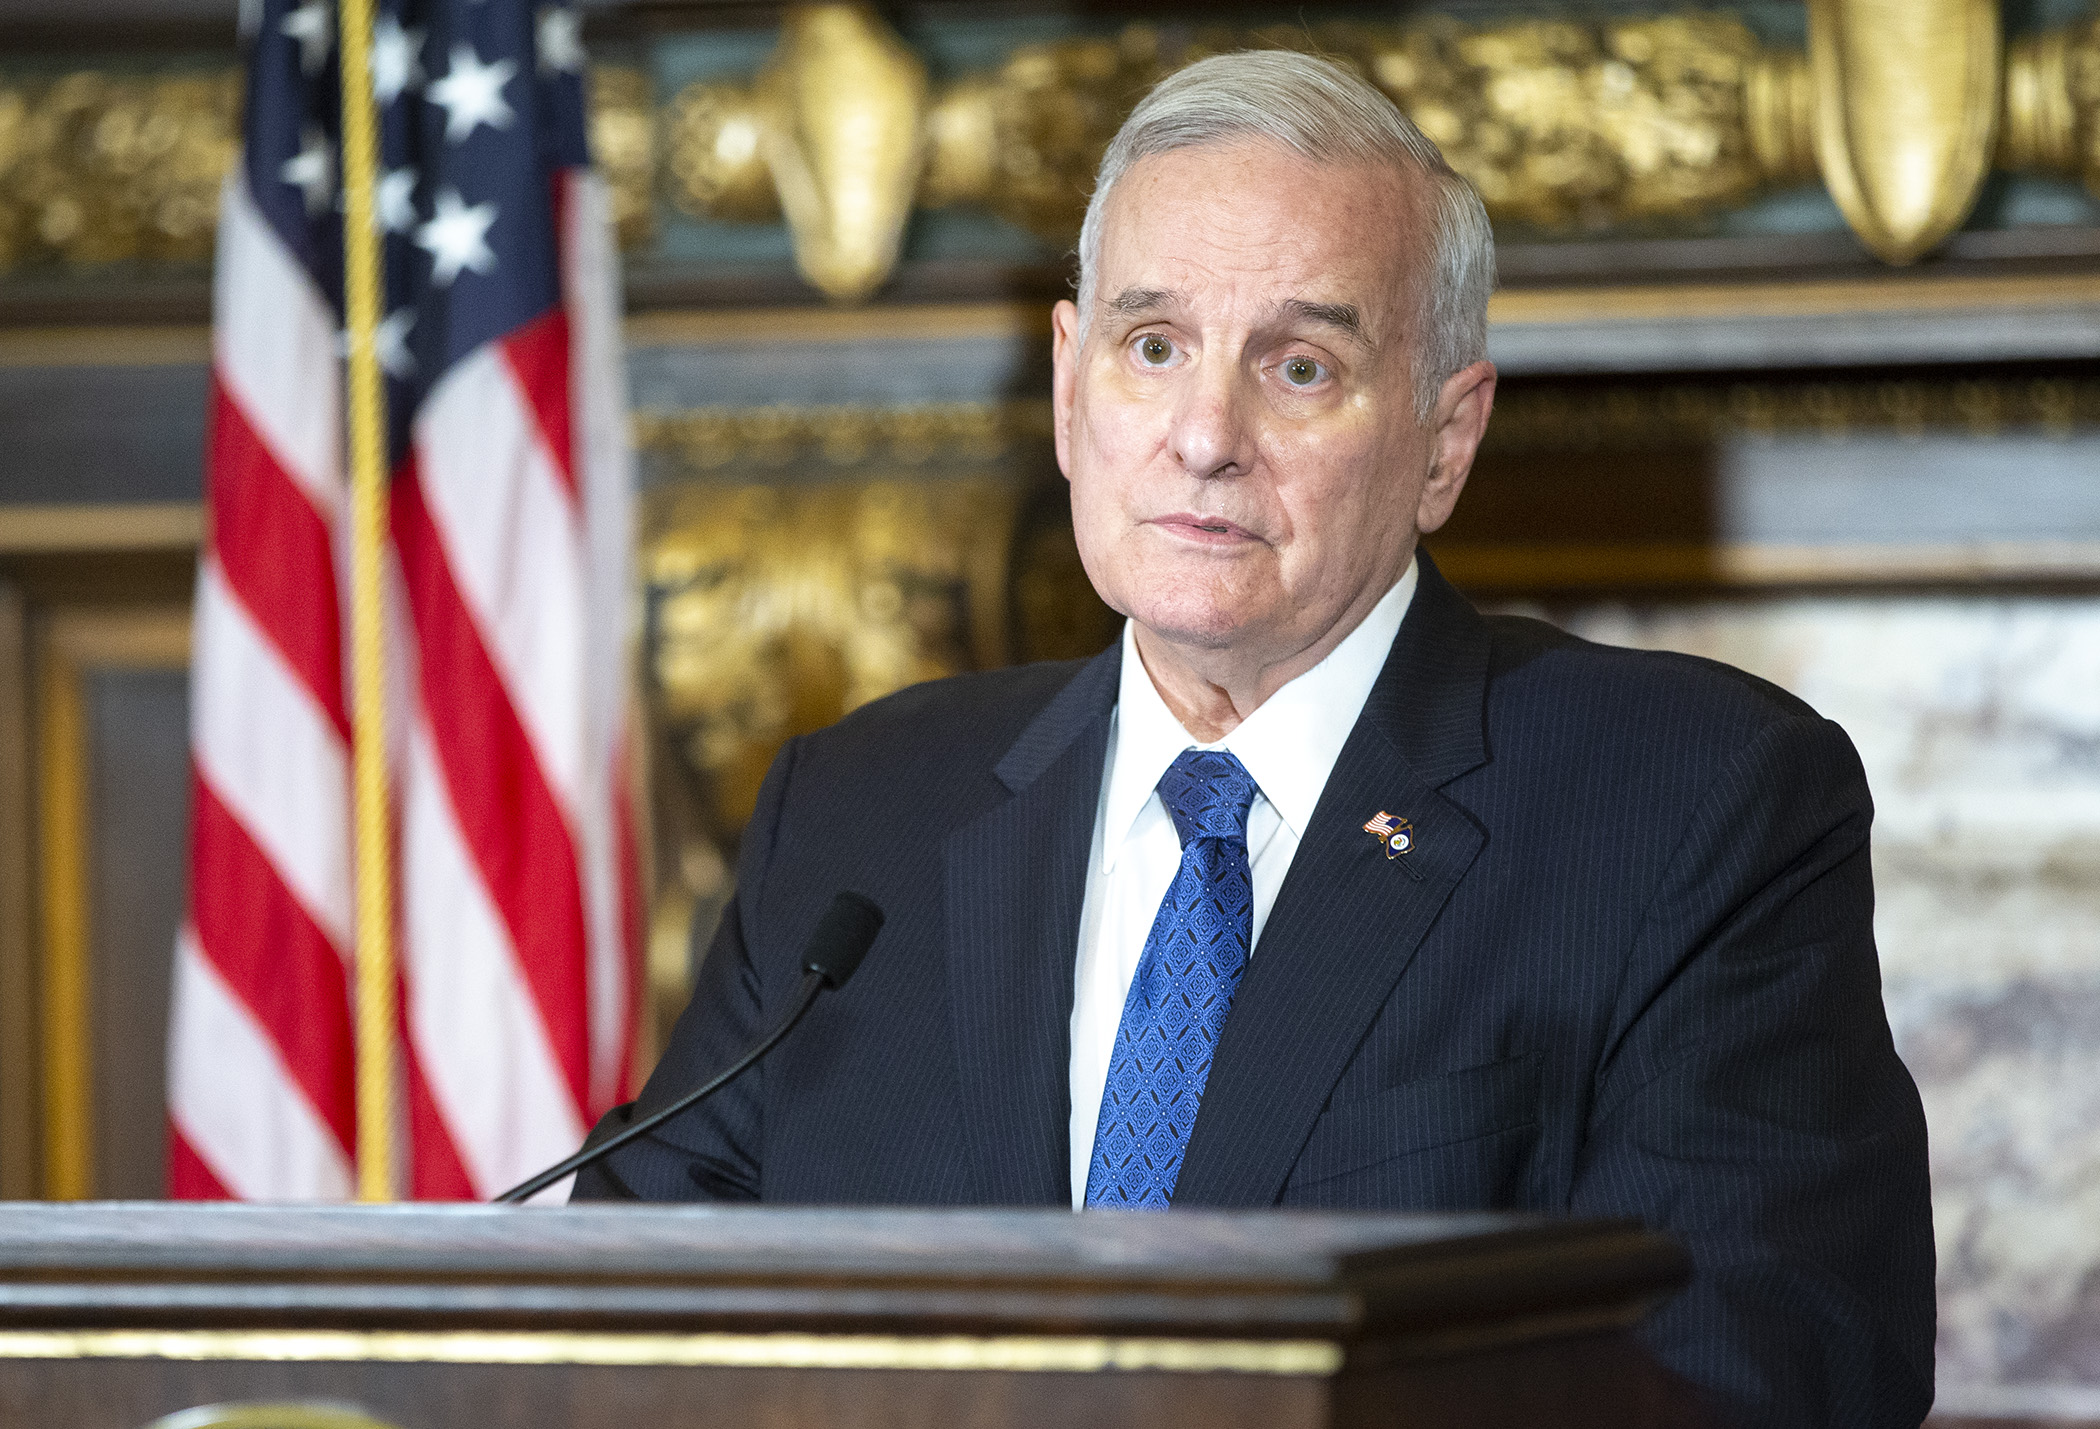 Gov. Mark Dayton announced at a May 23 press conference that he had vetoed both the omnibus supplemental budget and tax bills that were sent to him by the Legislature. Photo by Paul Battaglia